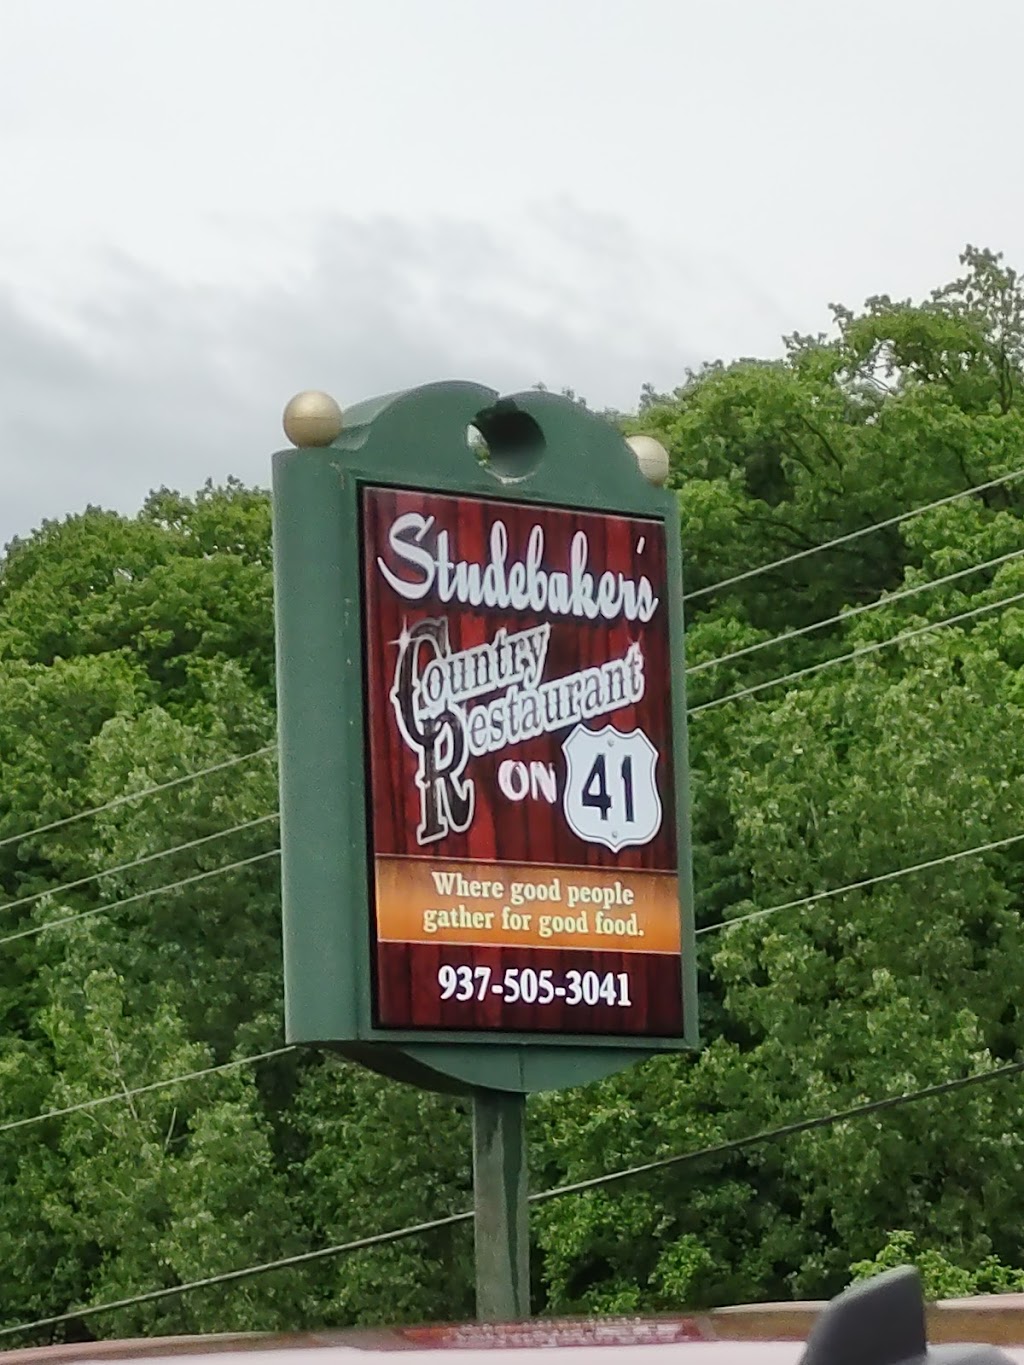 Studebakers Country Restaurant on 41 | 2800 Troy Rd, Springfield, OH 45504 | Phone: (937) 505-3041